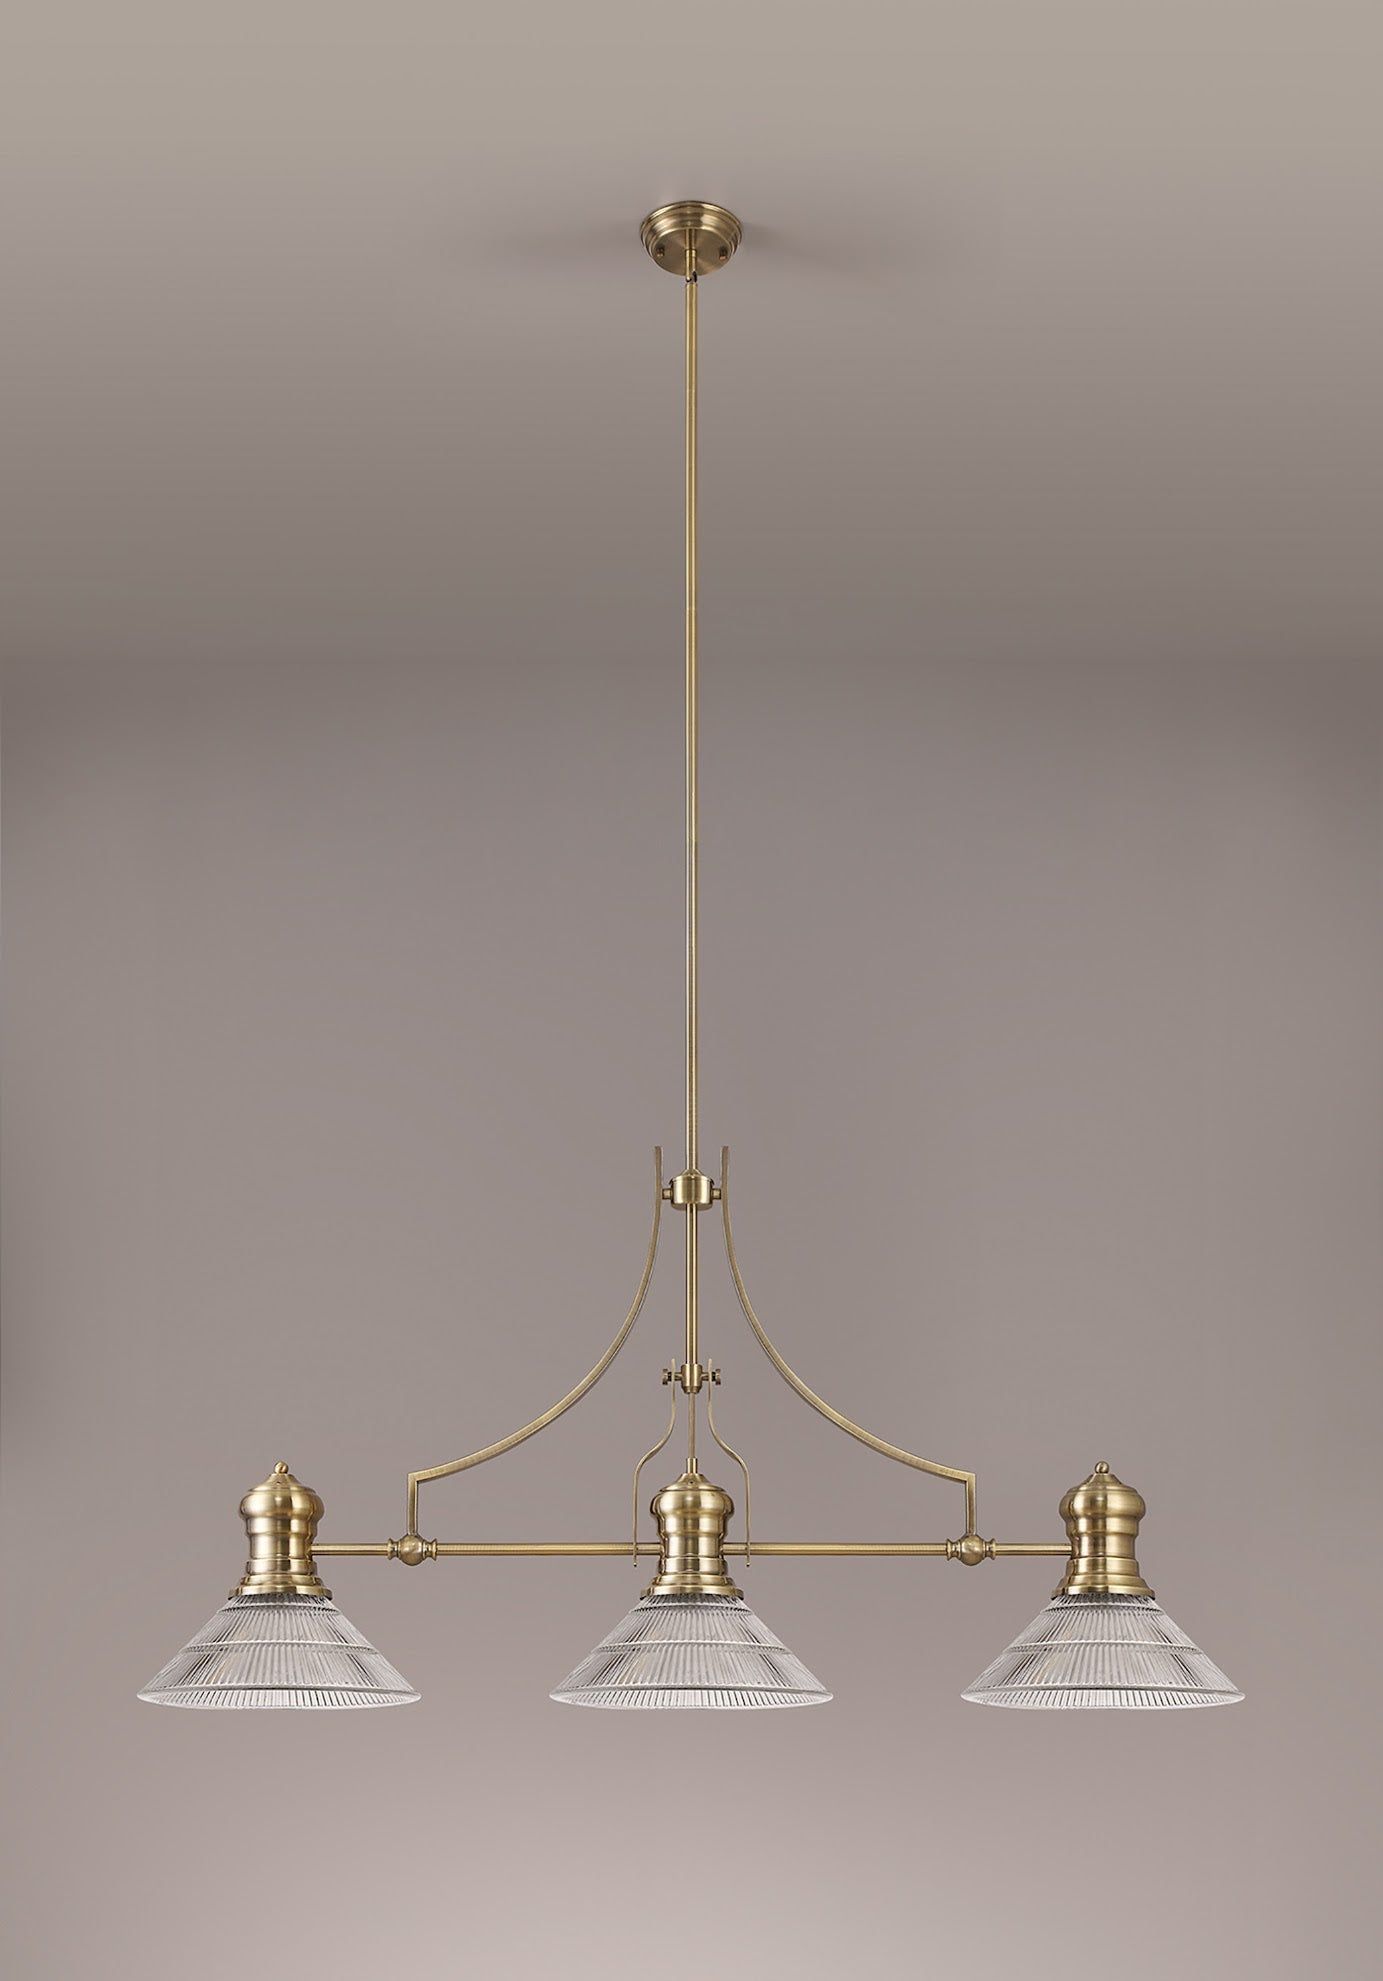 Savannah 3 Light Linear Pendant E27 With 30cm Cone Glass Shade, Antique Brass, Clear